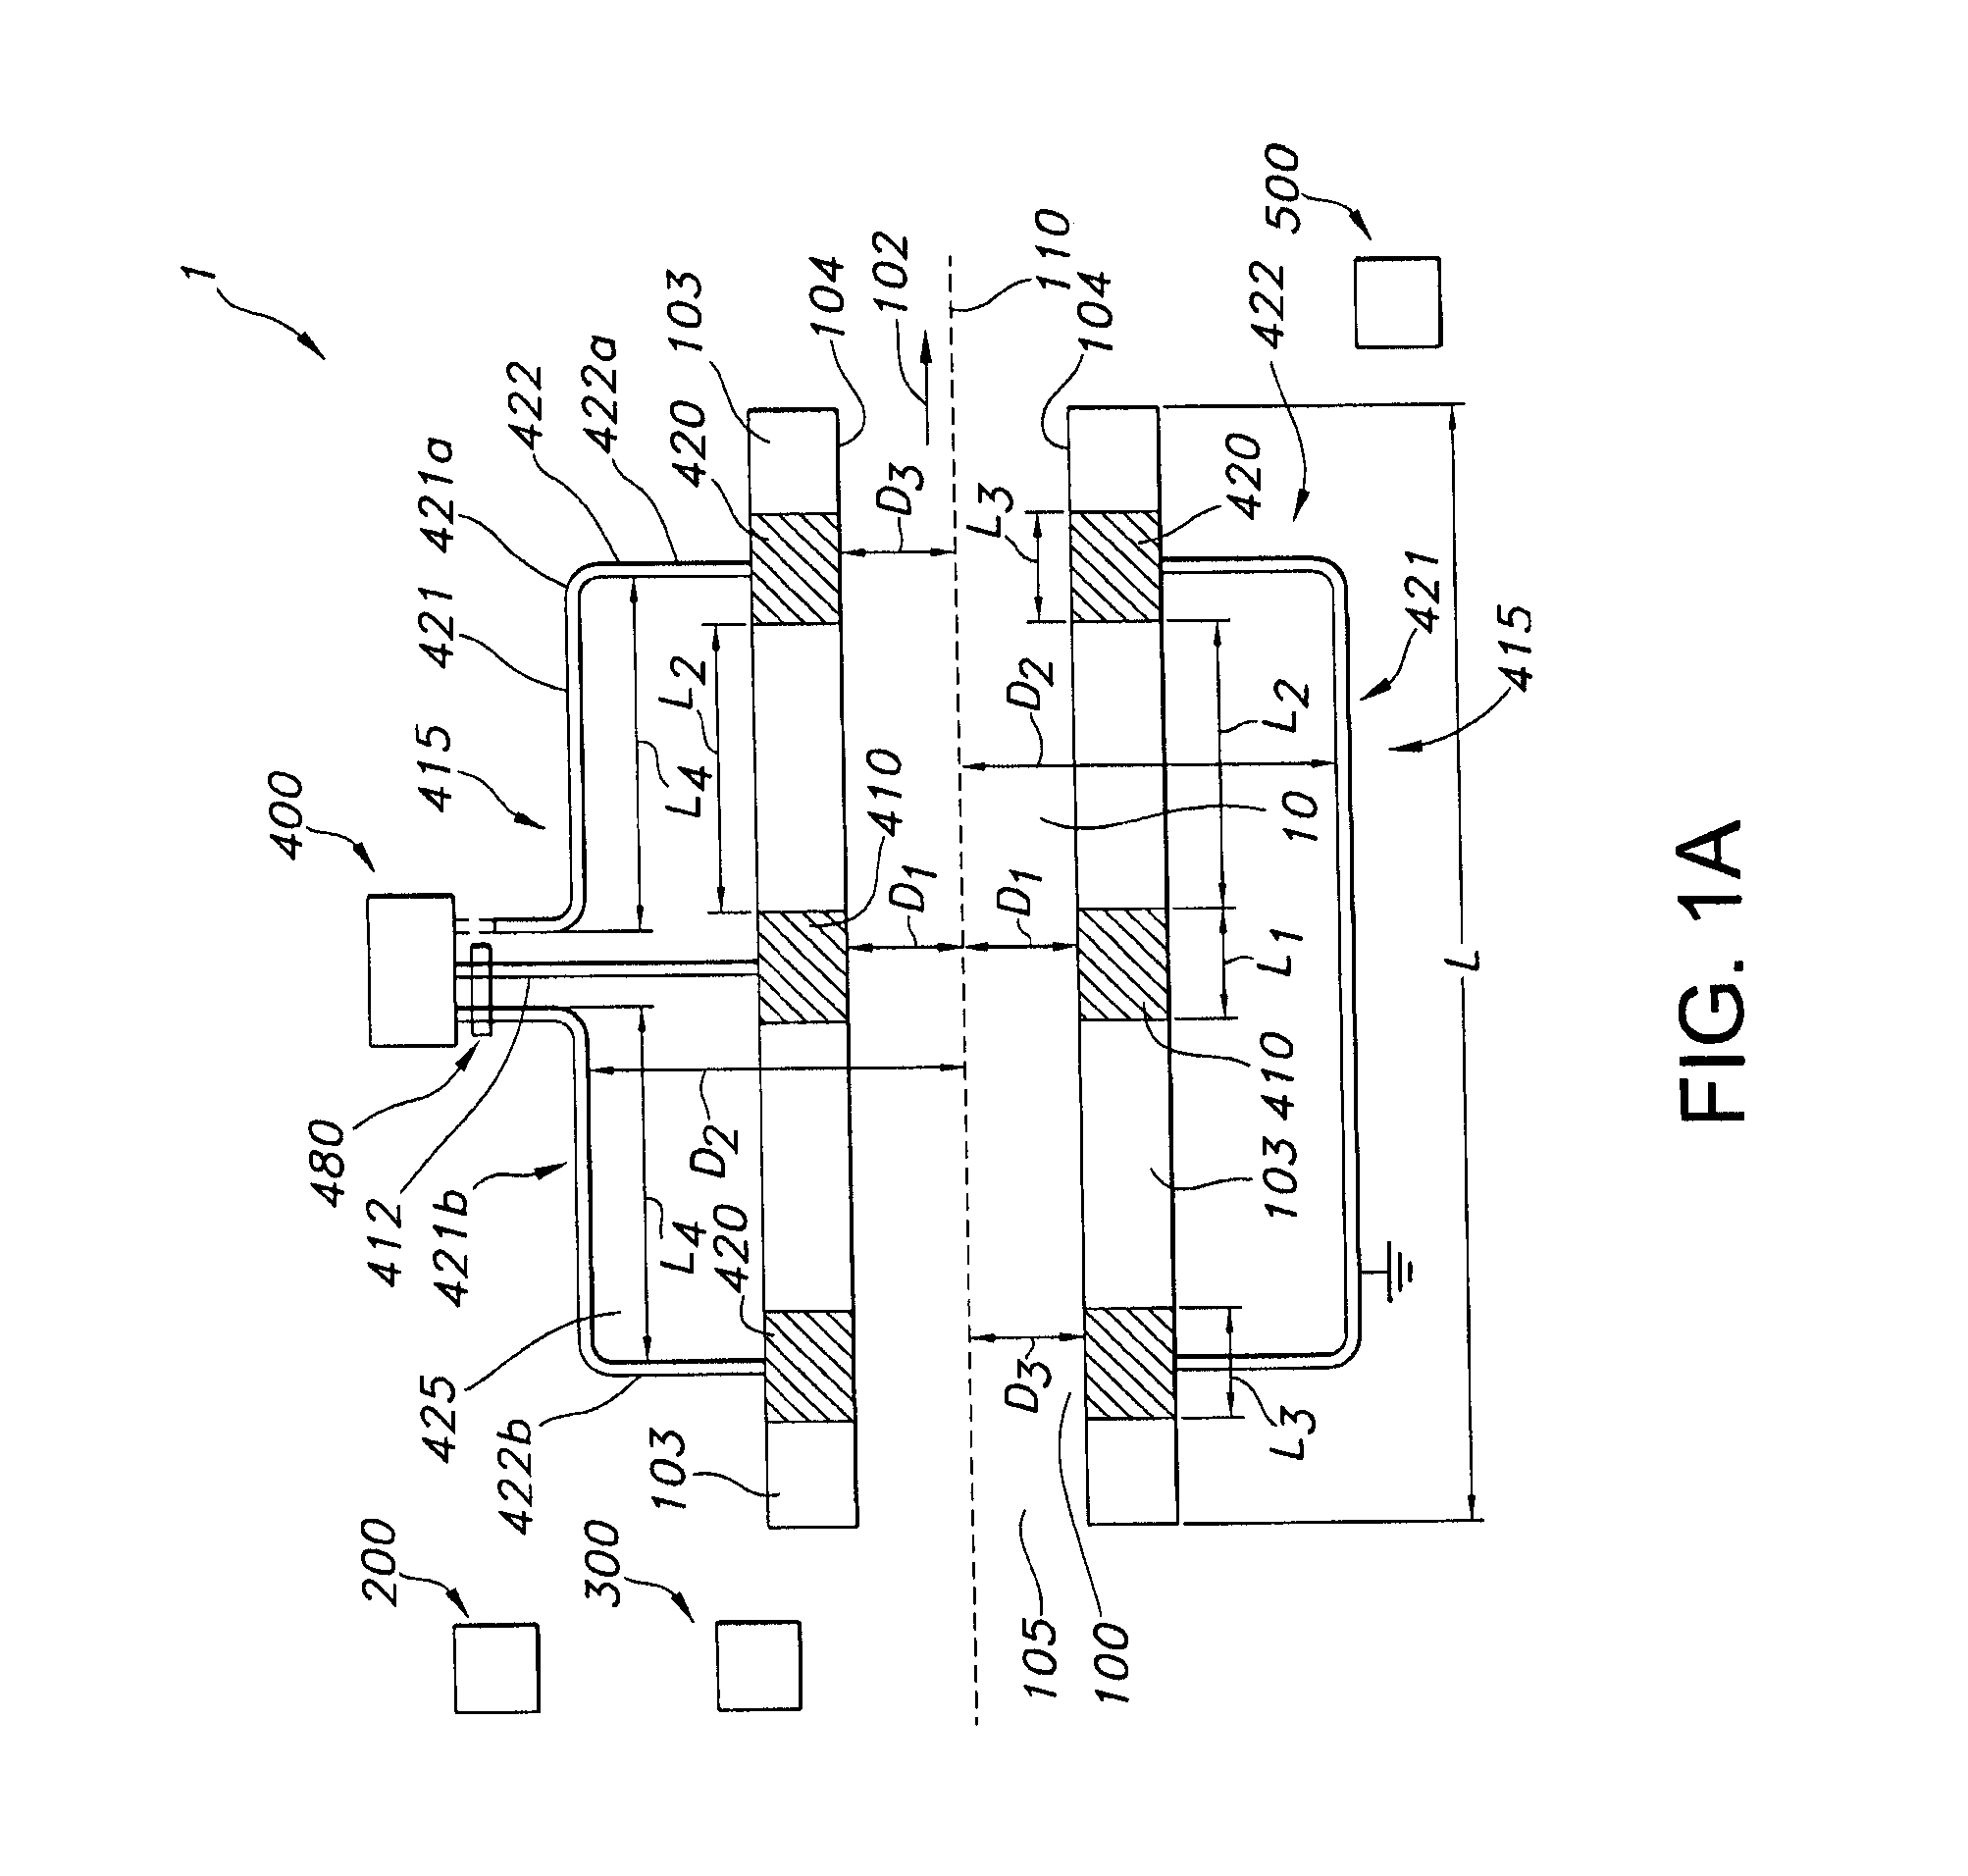 Apparatus and process for heat treating a packaged food product